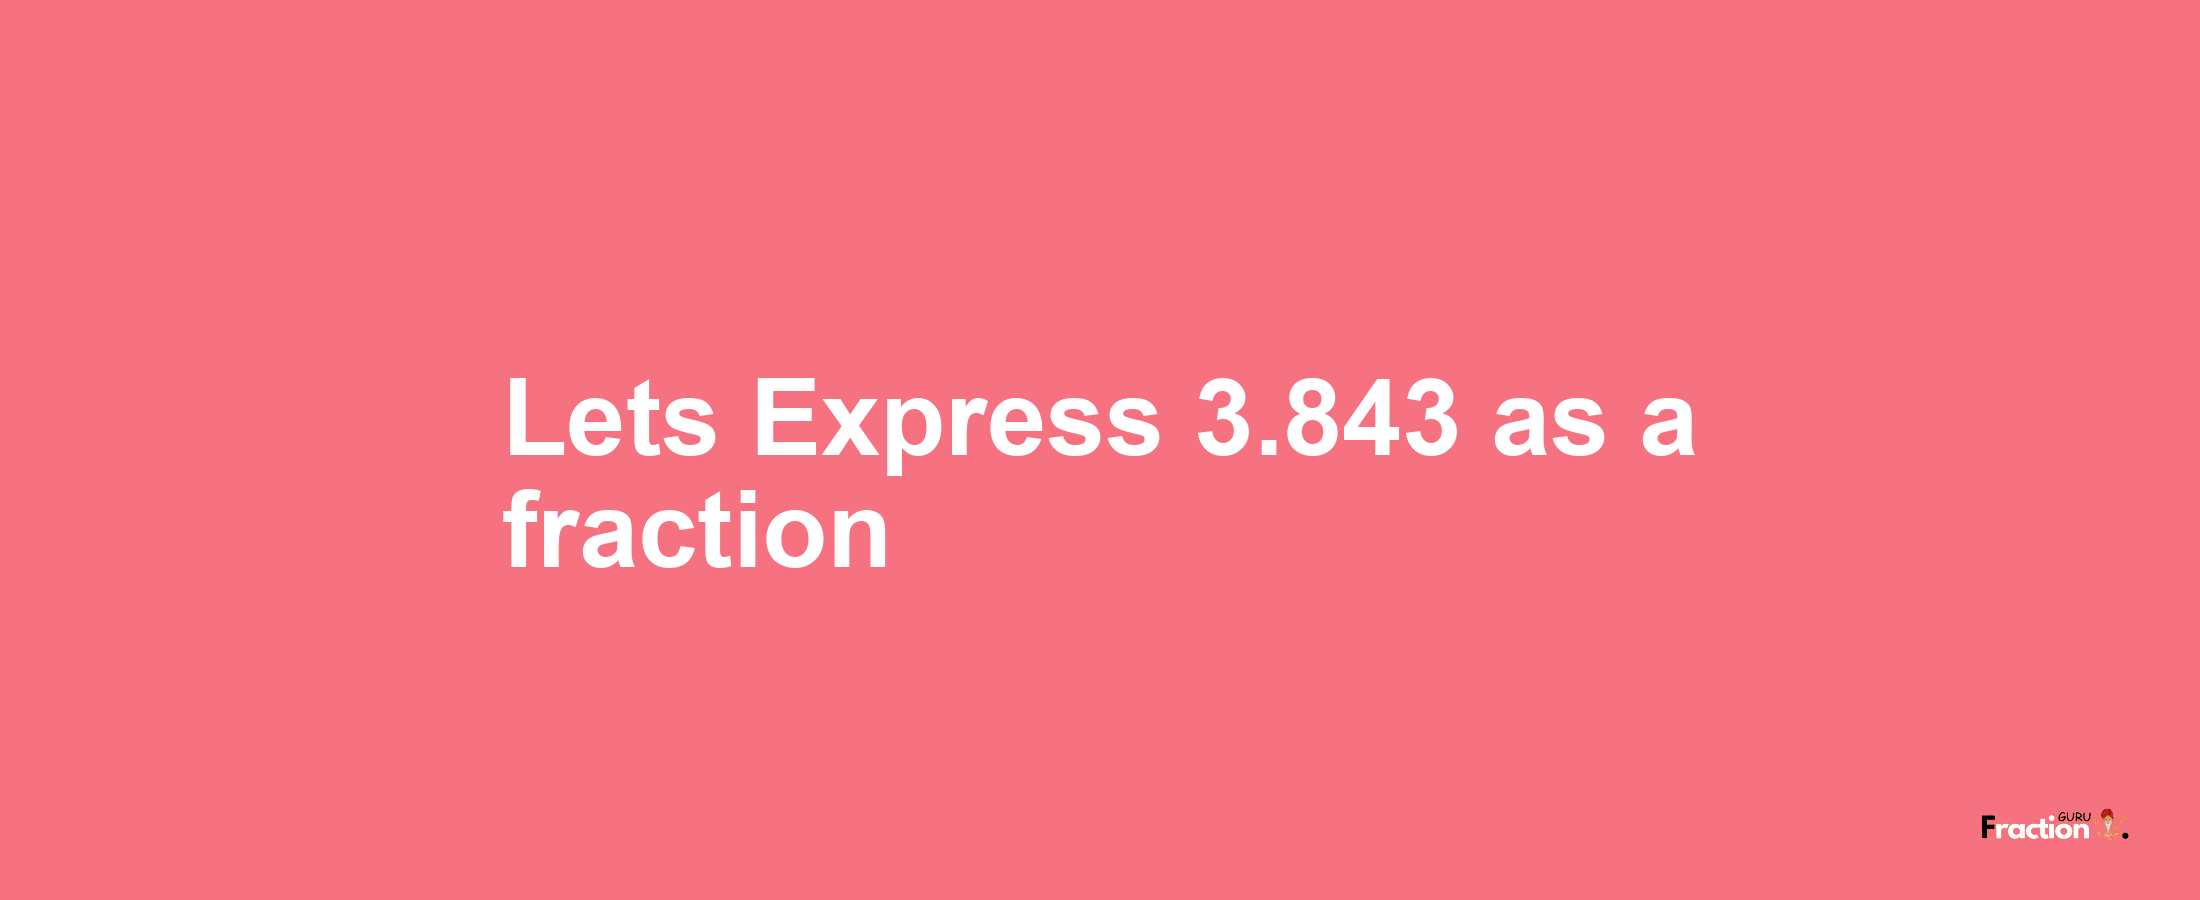 Lets Express 3.843 as afraction